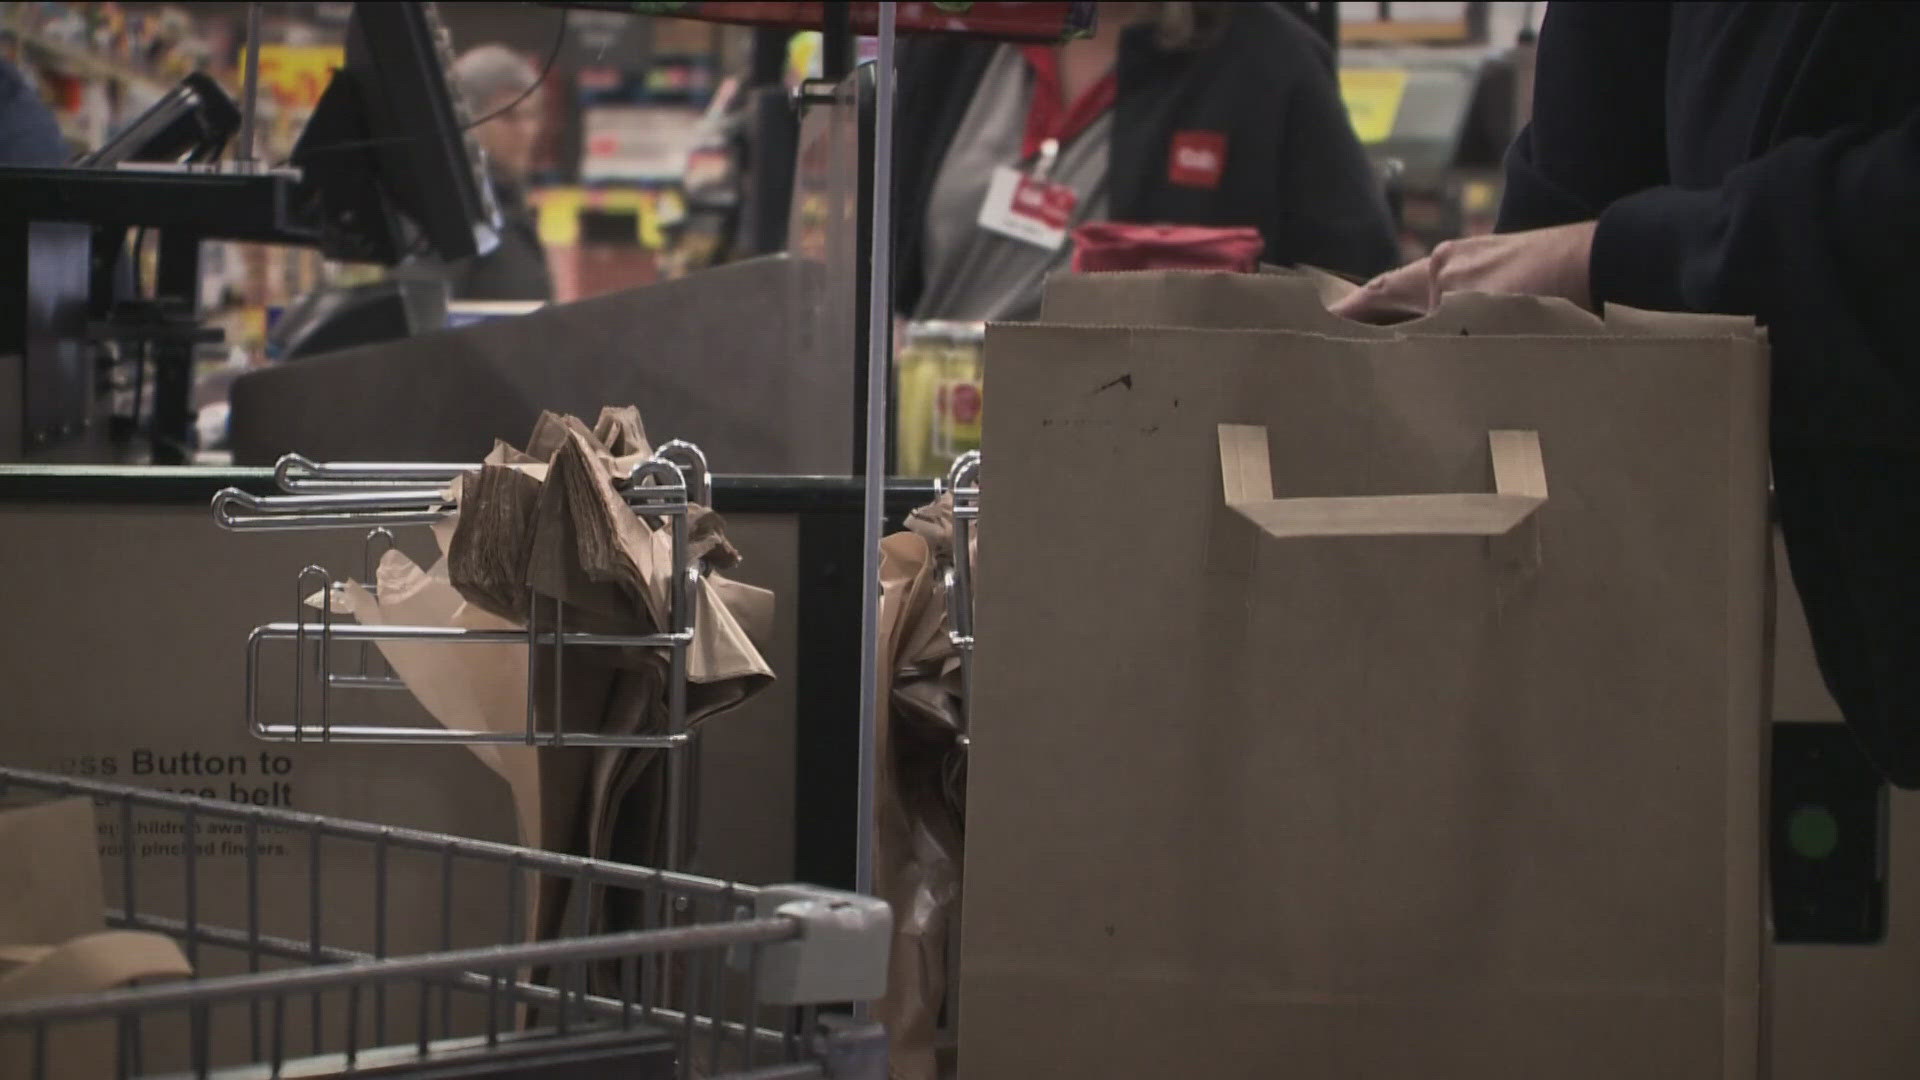 Food prices aren't rising as quickly anymore, but people are still feeling the pinch at the grocery store. Now federal officials are investigating.